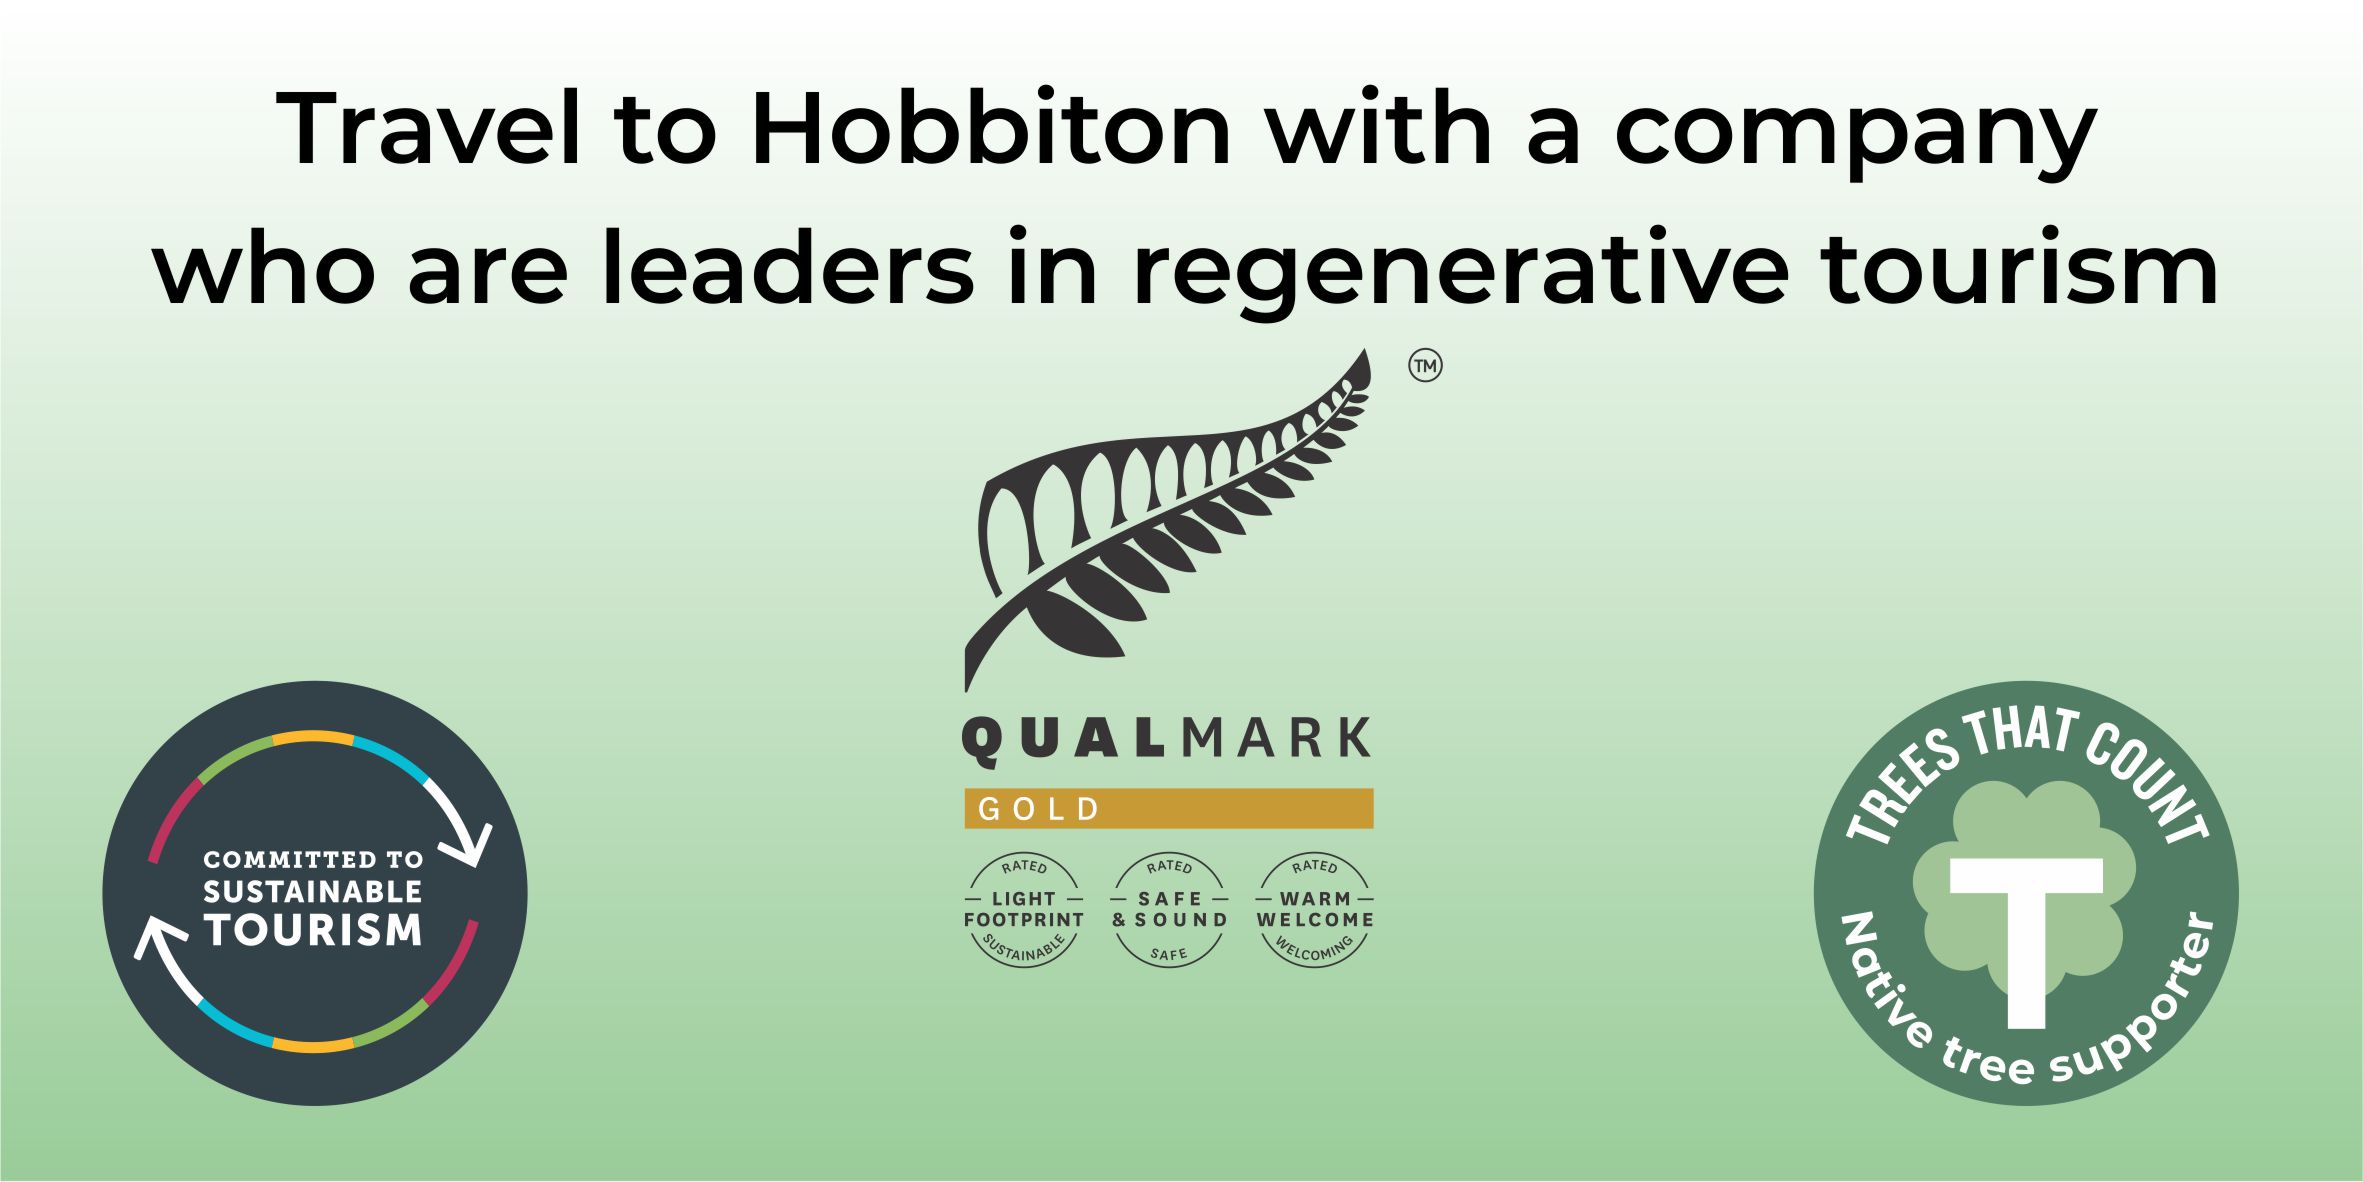 Travel from Auckland to Hobbiton with a company who are leaders in regenerative tourism